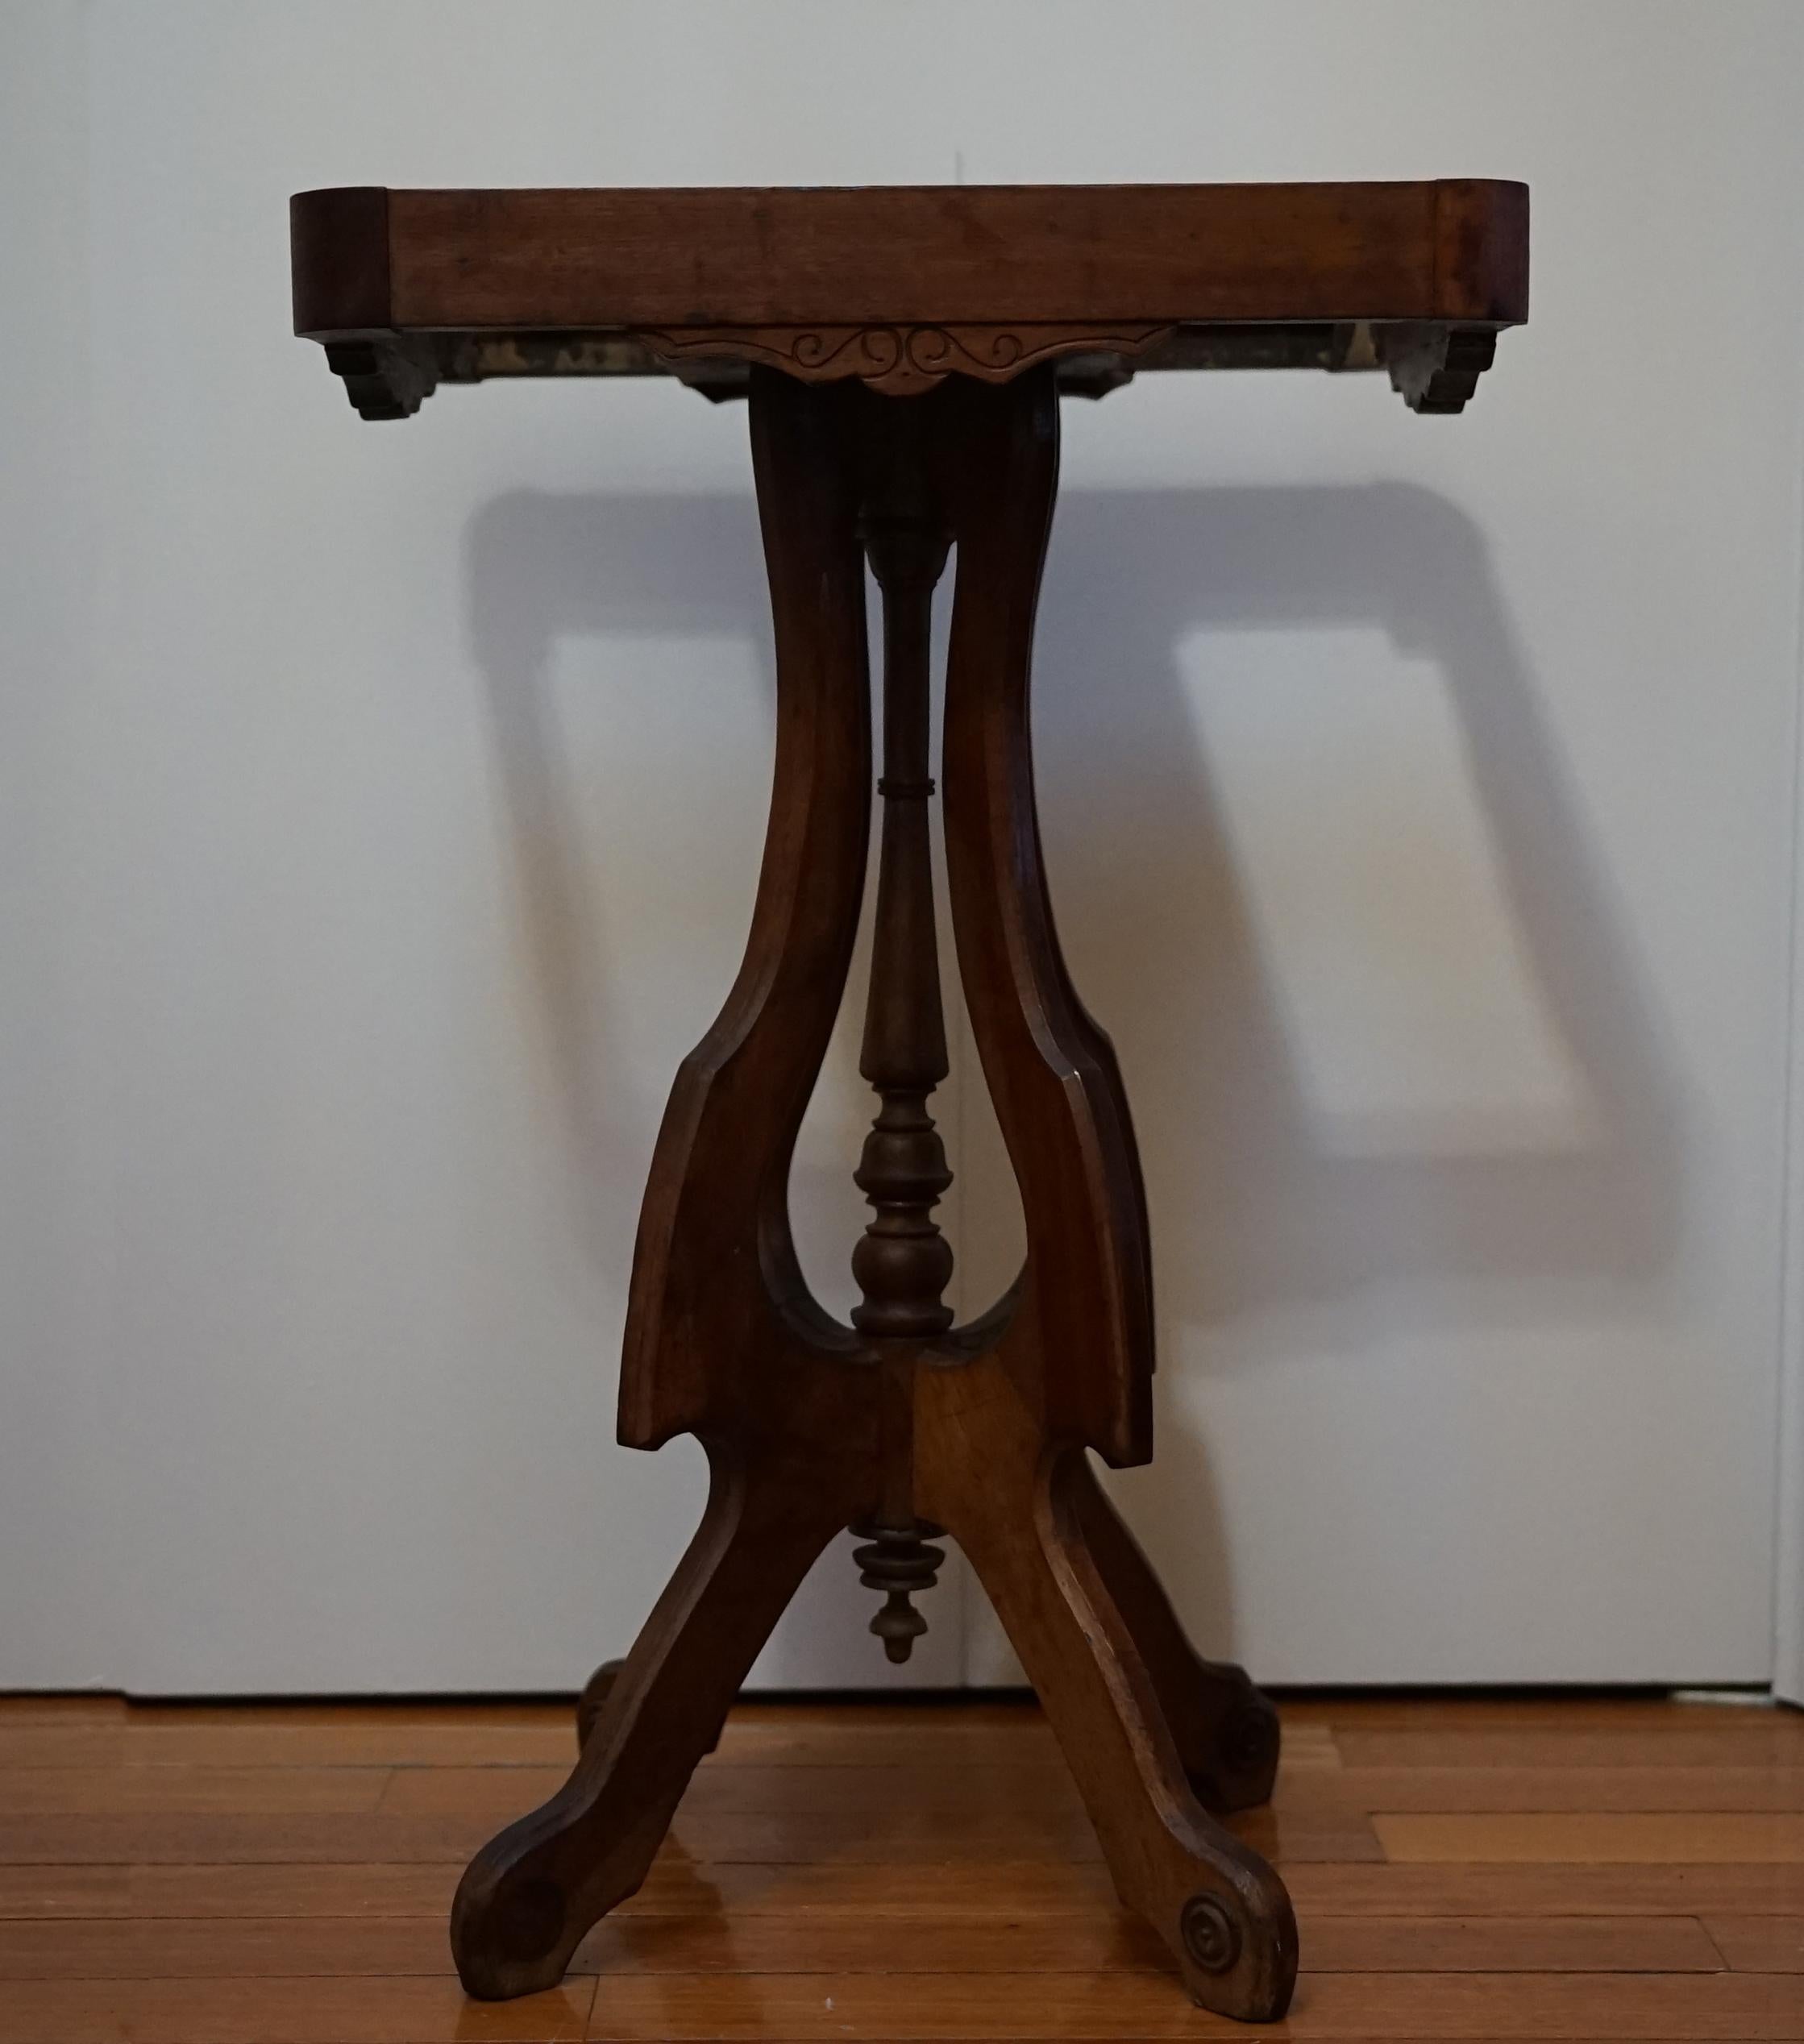 A rectangular white marble top rests on a walnut base with this occasional table. It is from the Victorian period. The carved walnut marble-topped table is 
American or English, and it was manufactured in 1881, according to a label that describes